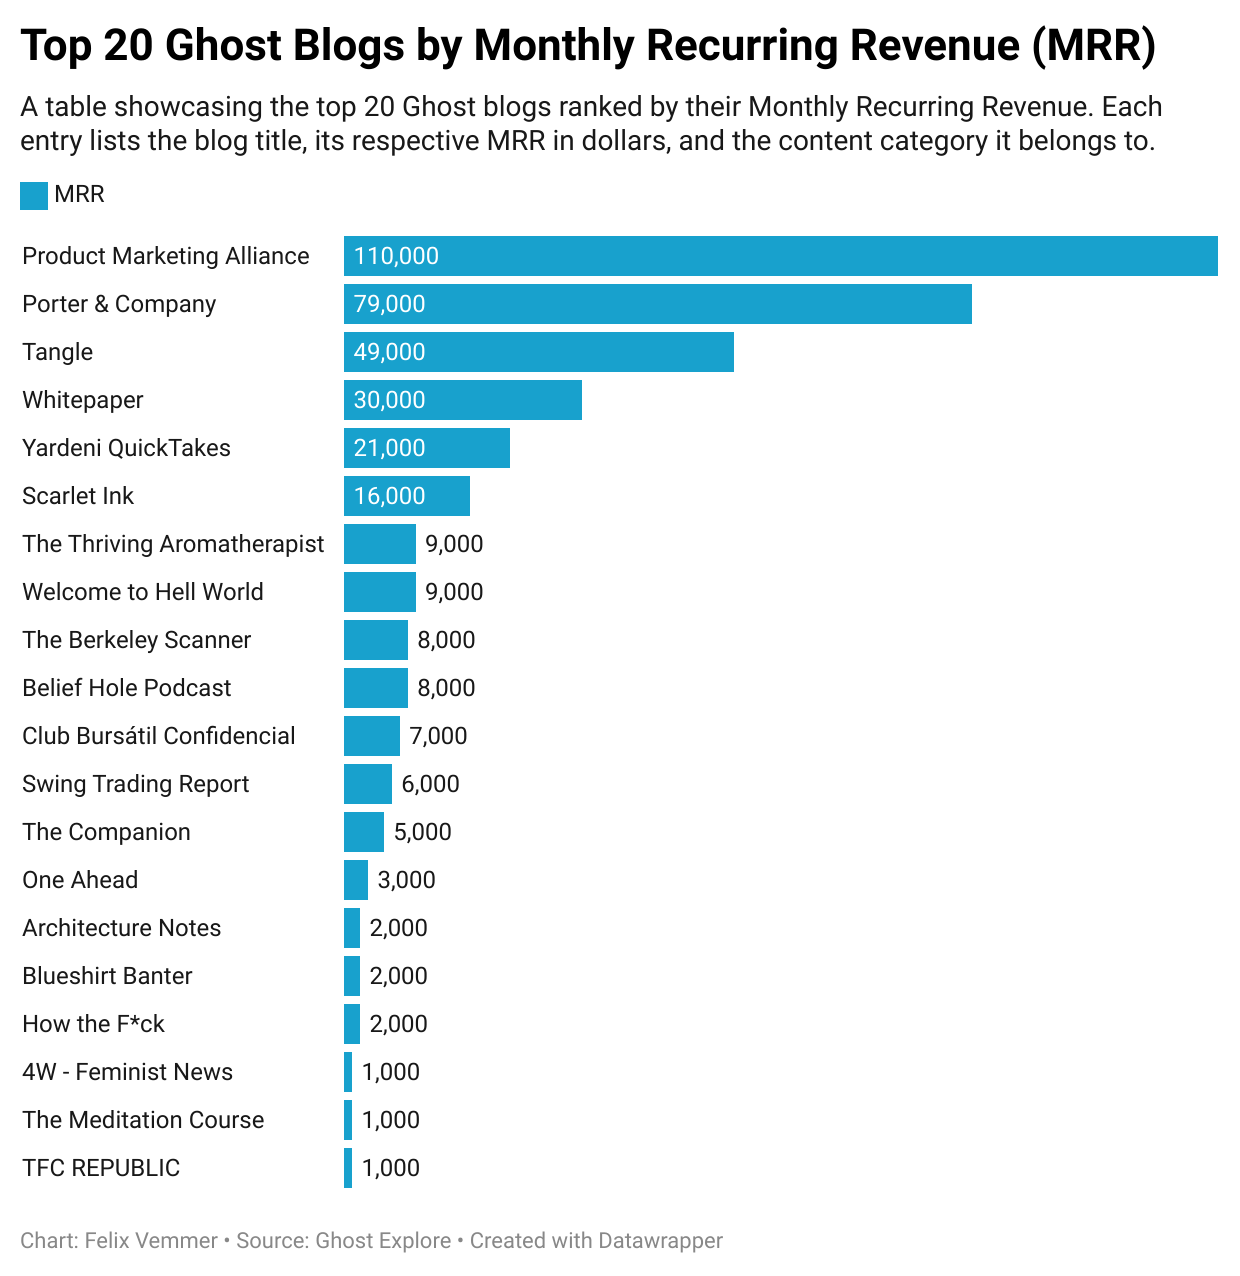 Top 20 Ghost Blogs by Monthly Recurring Revenue (MRR)